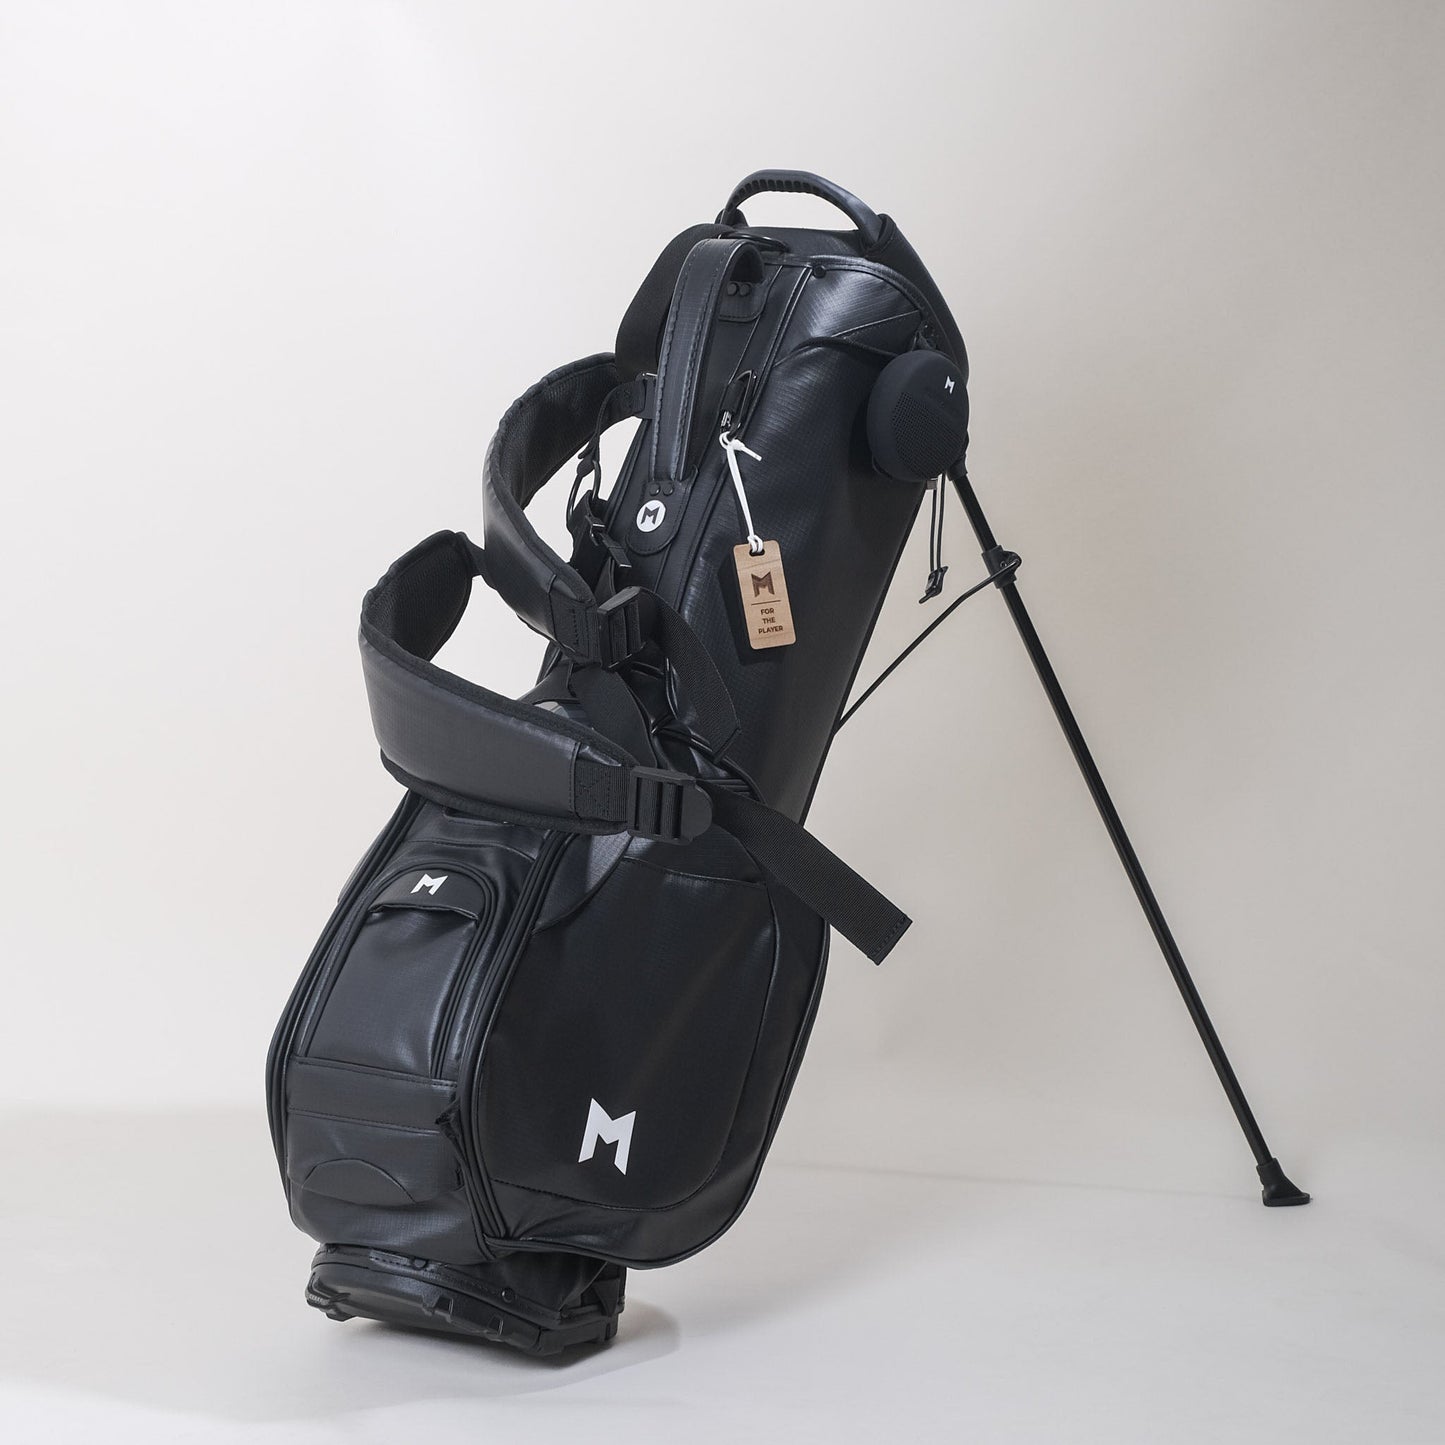 The MNML GOLF MR1 is a standard carry bag made from premium recycled ripstop.